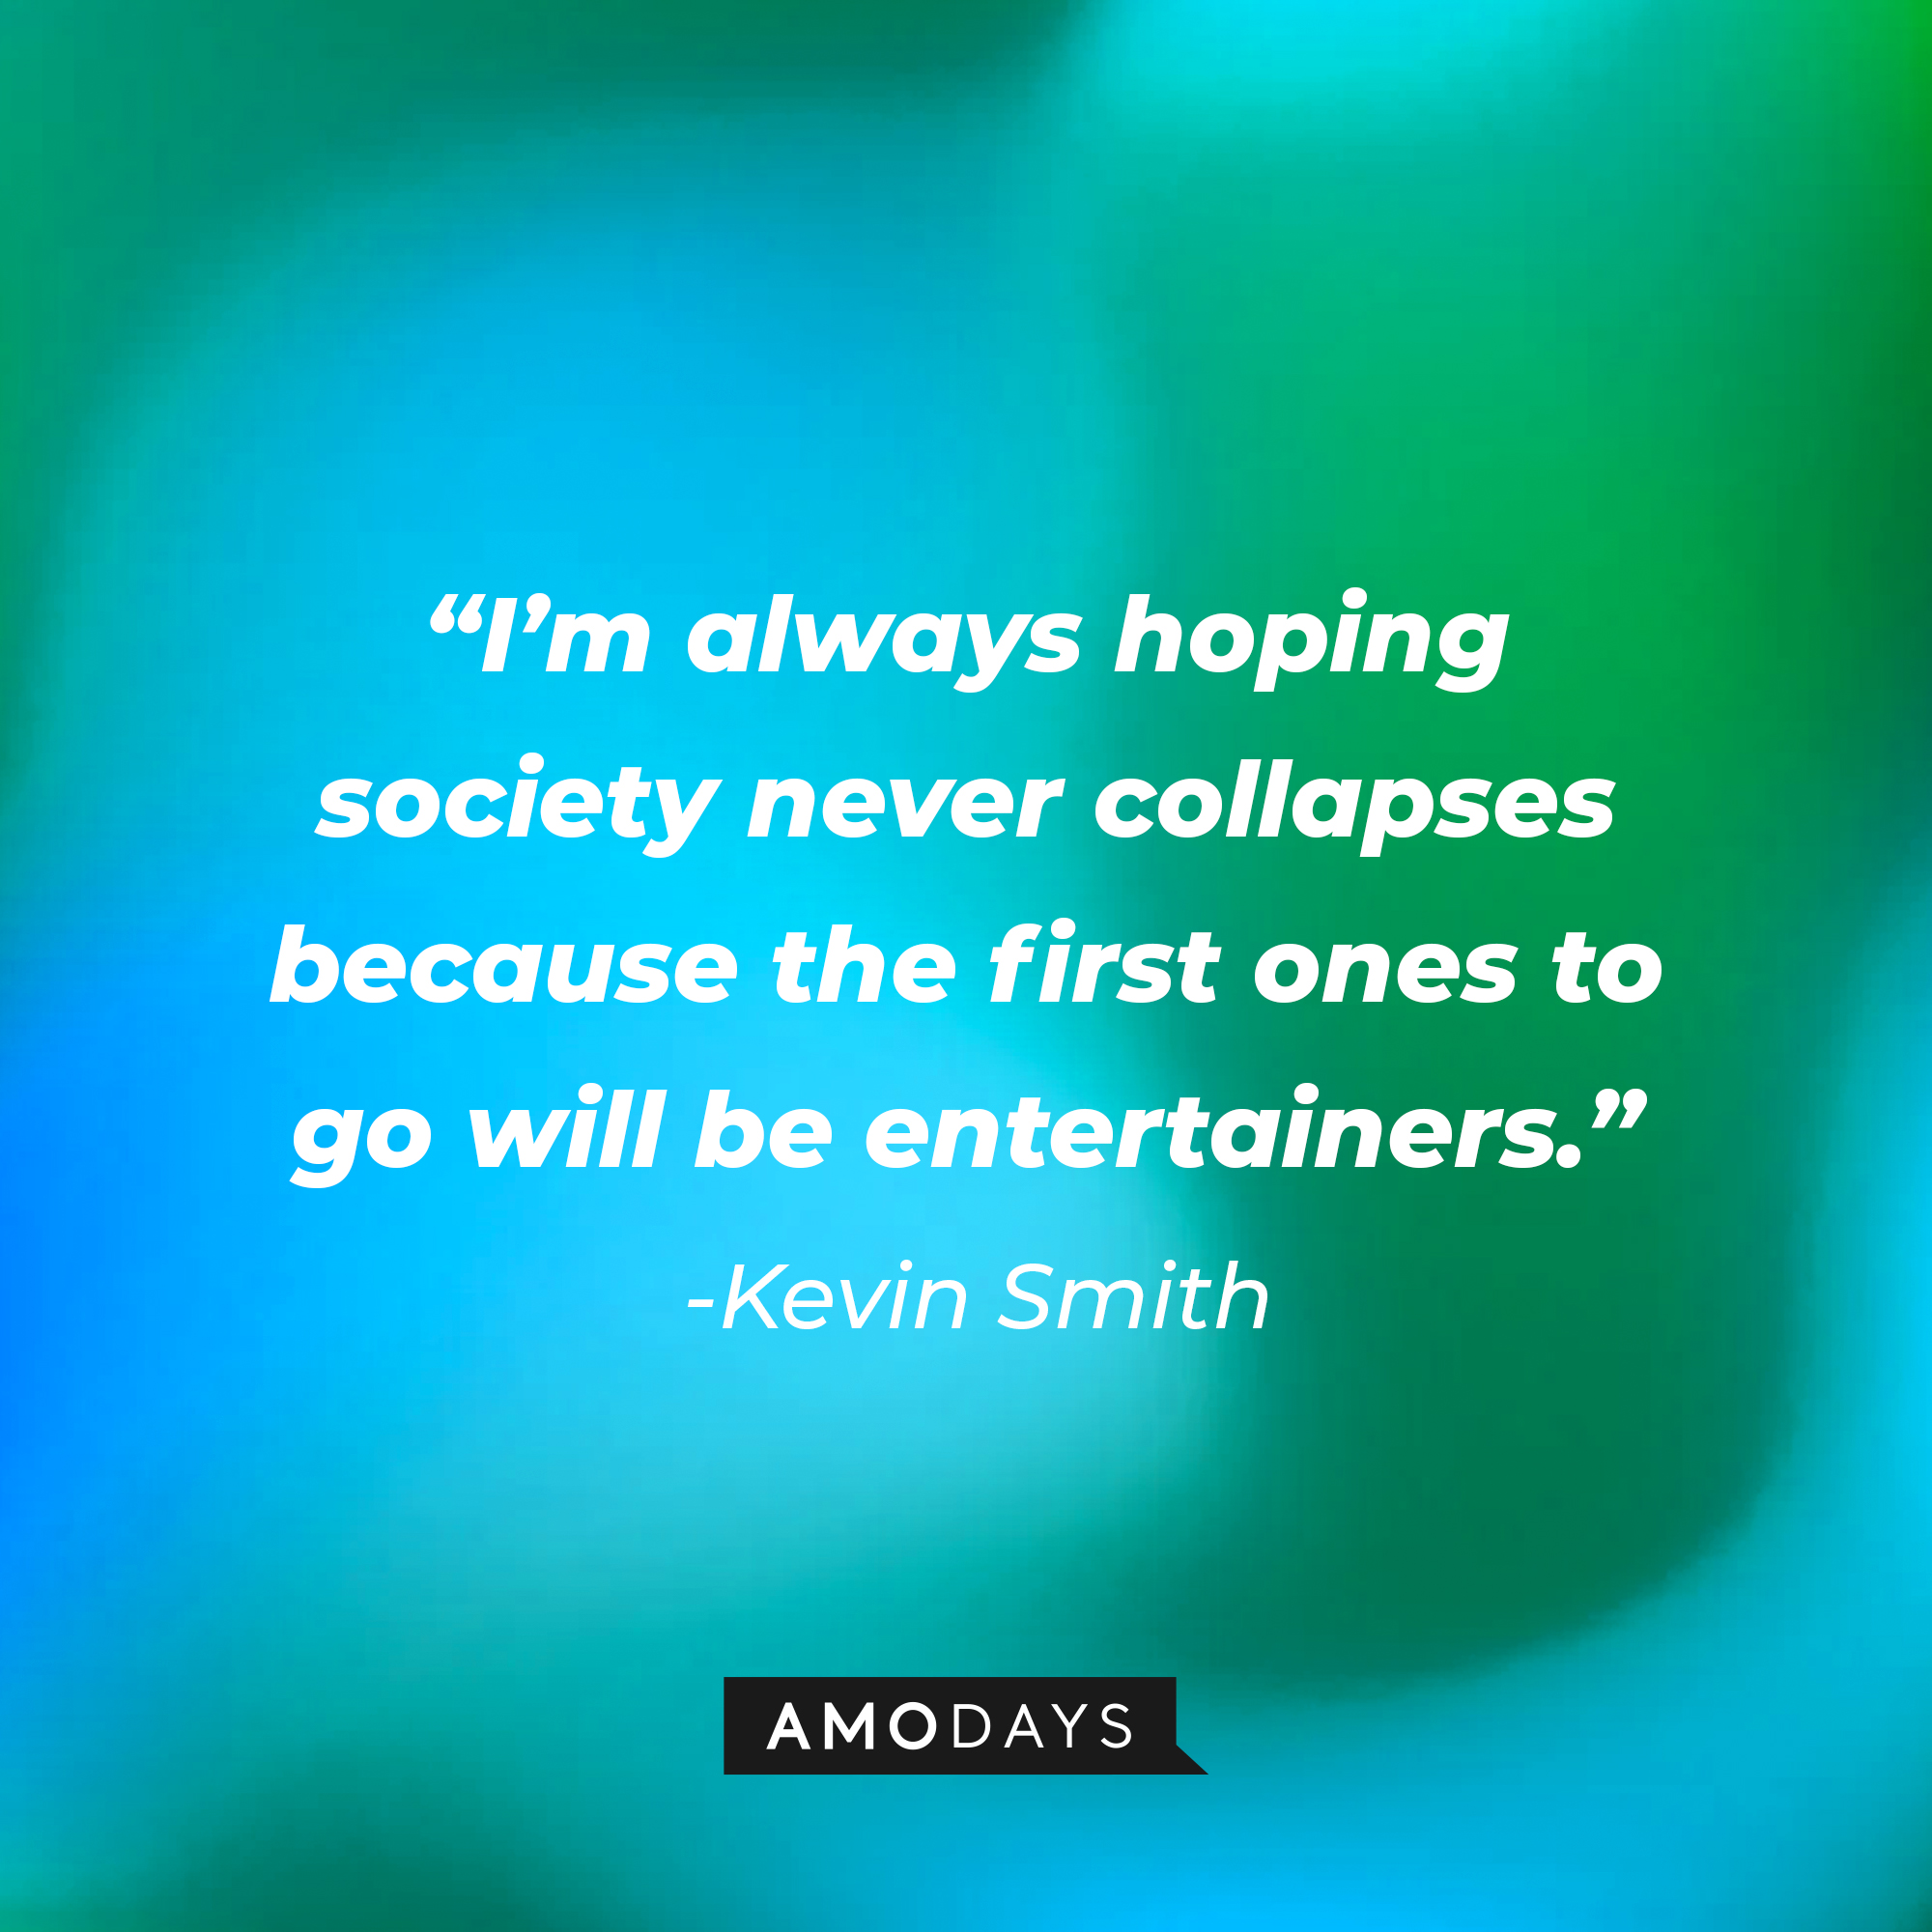 Kevin Smith’s quote: “I’m always hoping society never collapses because the first ones to go will be entertainers.” | Source: AmoDays